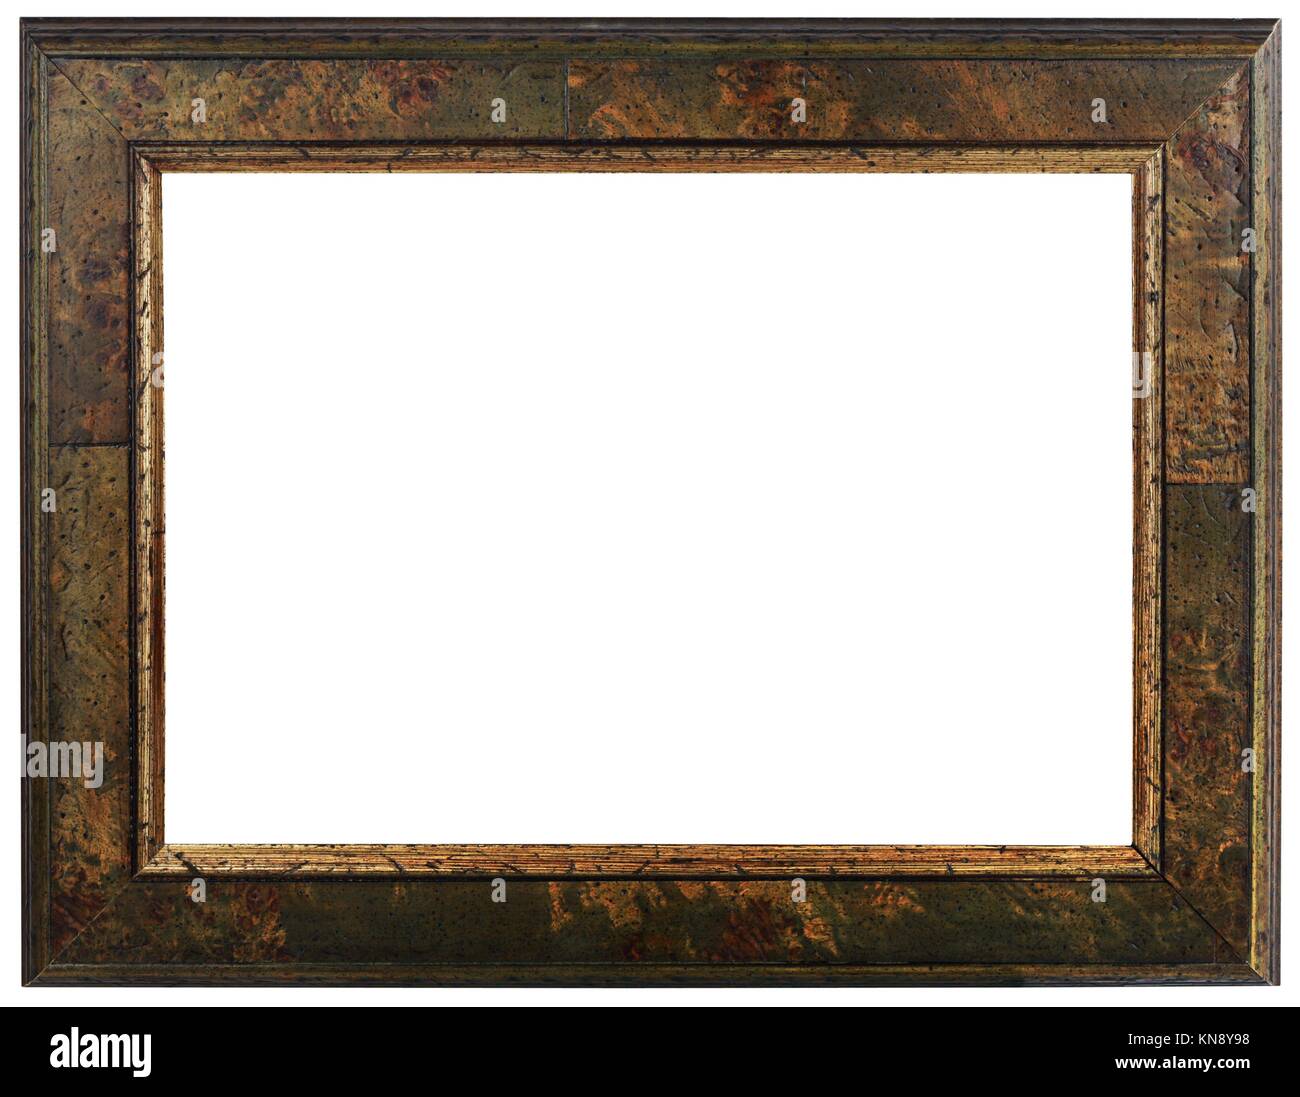 Wooden picture frame 3-color shade and gold. Backing board- can be removed  with 1 step selection (image is selection friendly Stock Photo - Alamy